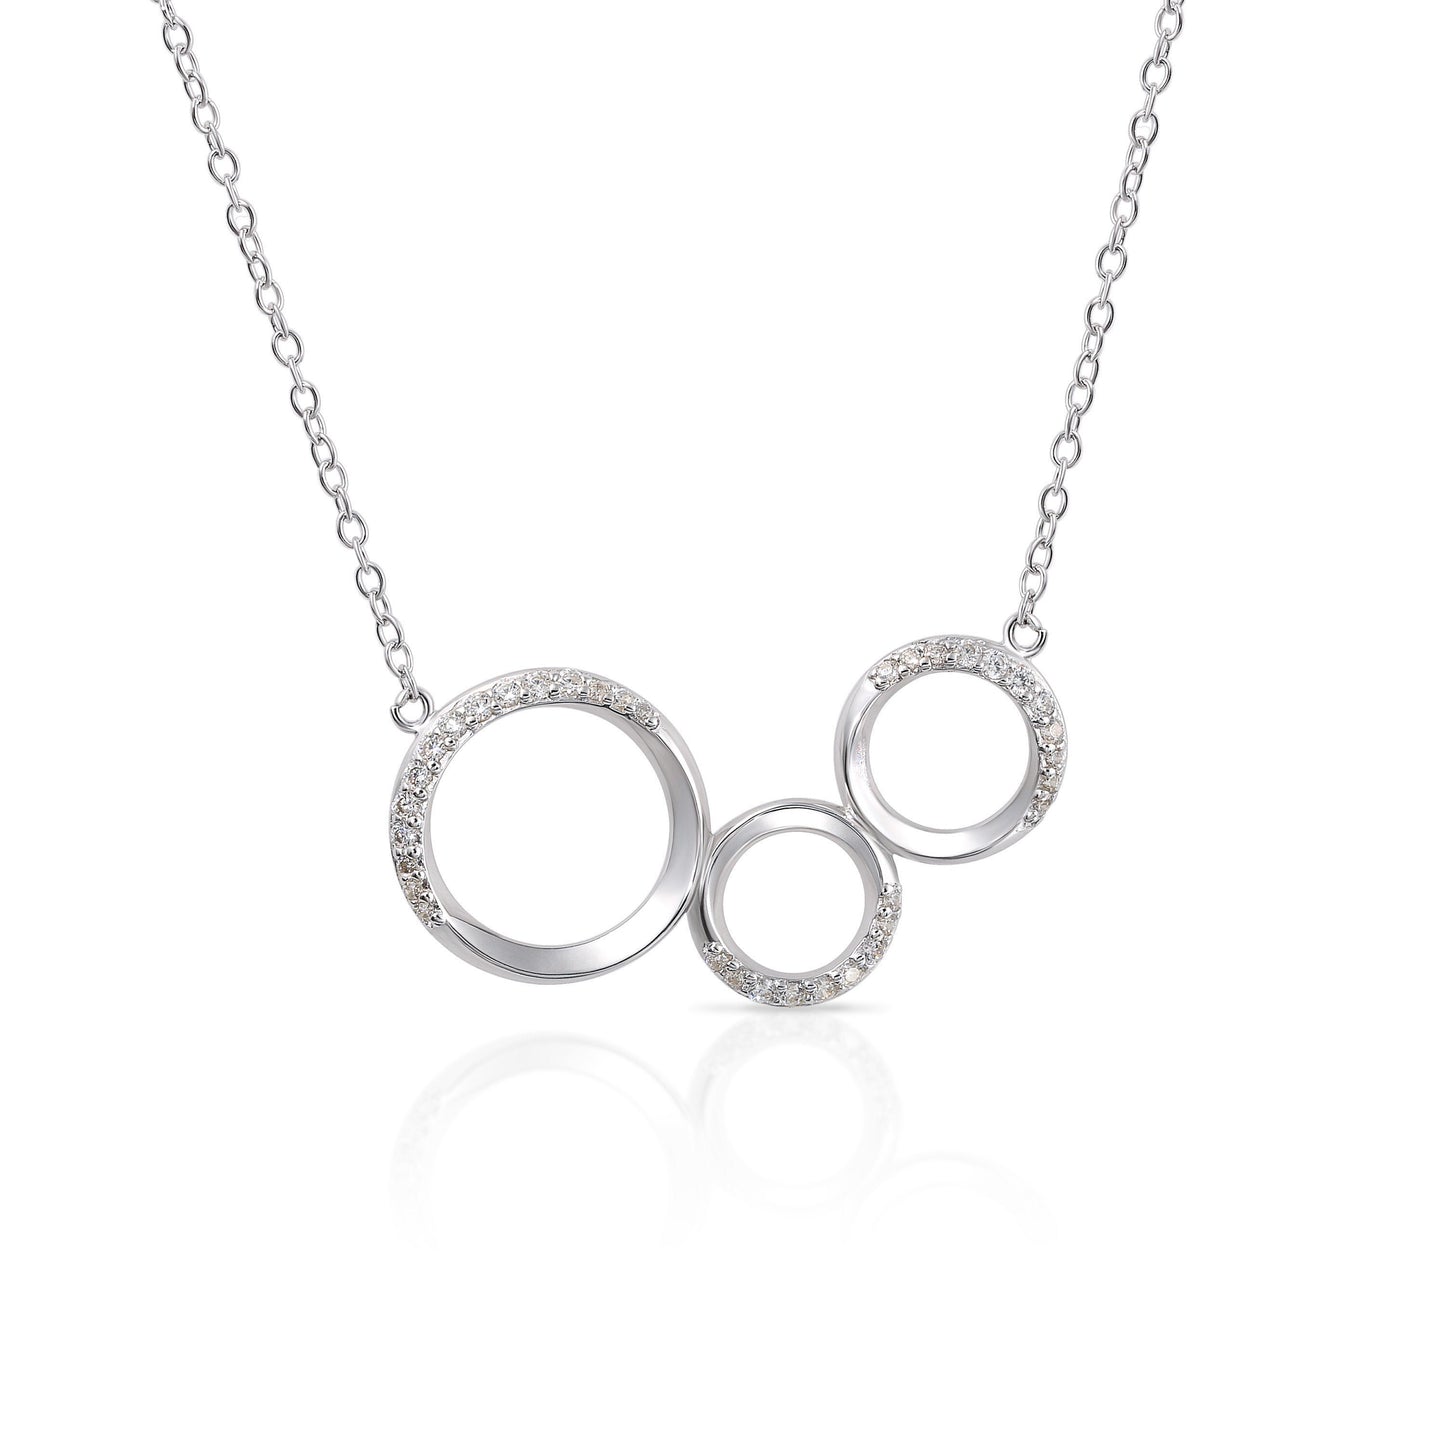 Connected Circles Necklace in Sterling Silver